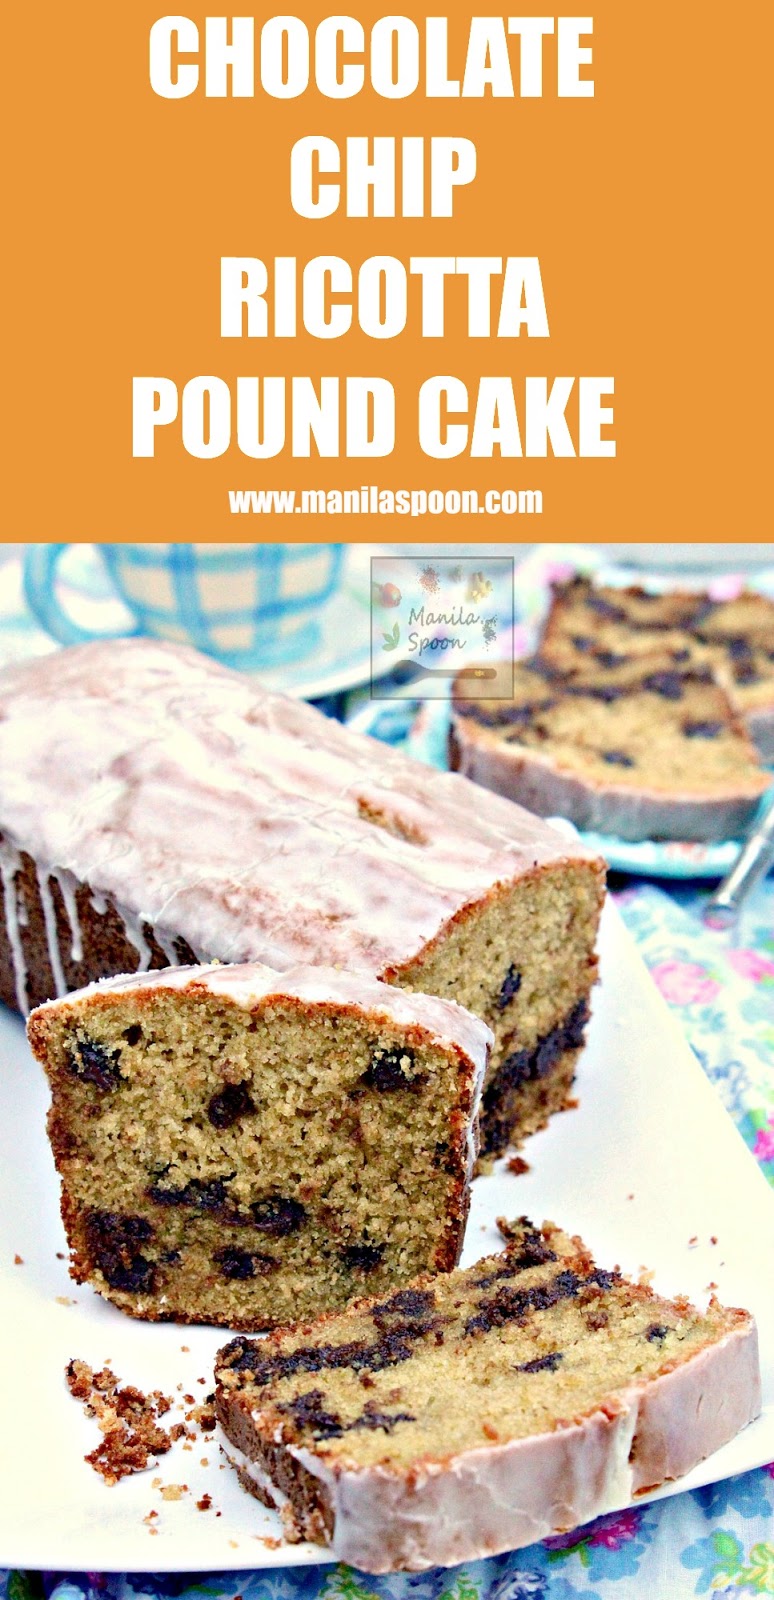 Chocolate Chips and Ricotta Cheese lend a lot of flavor to this moist and delicious pound cake. Perfect with coffee or a cup of tea and certainly as dessert served with fruit or whipped cream! | manilaspoon.com